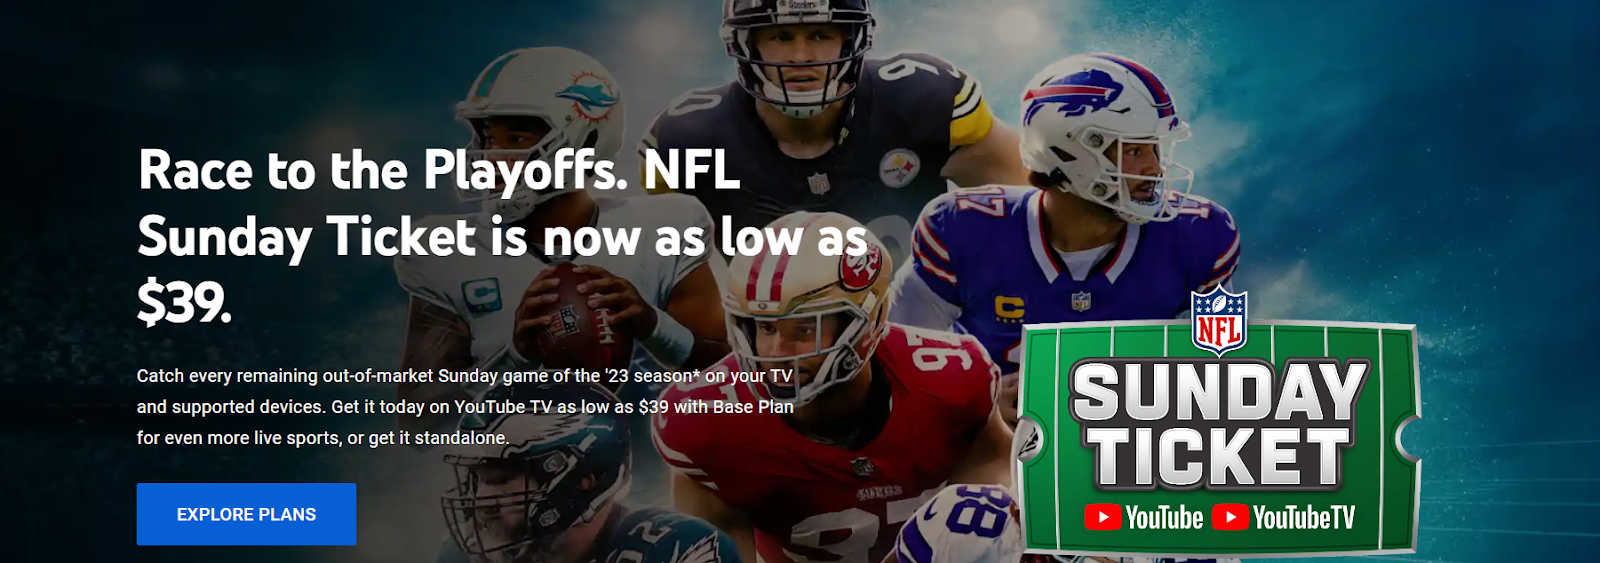 The YouTube TV NFL landing pages - includes the NFL Sunday Ticket